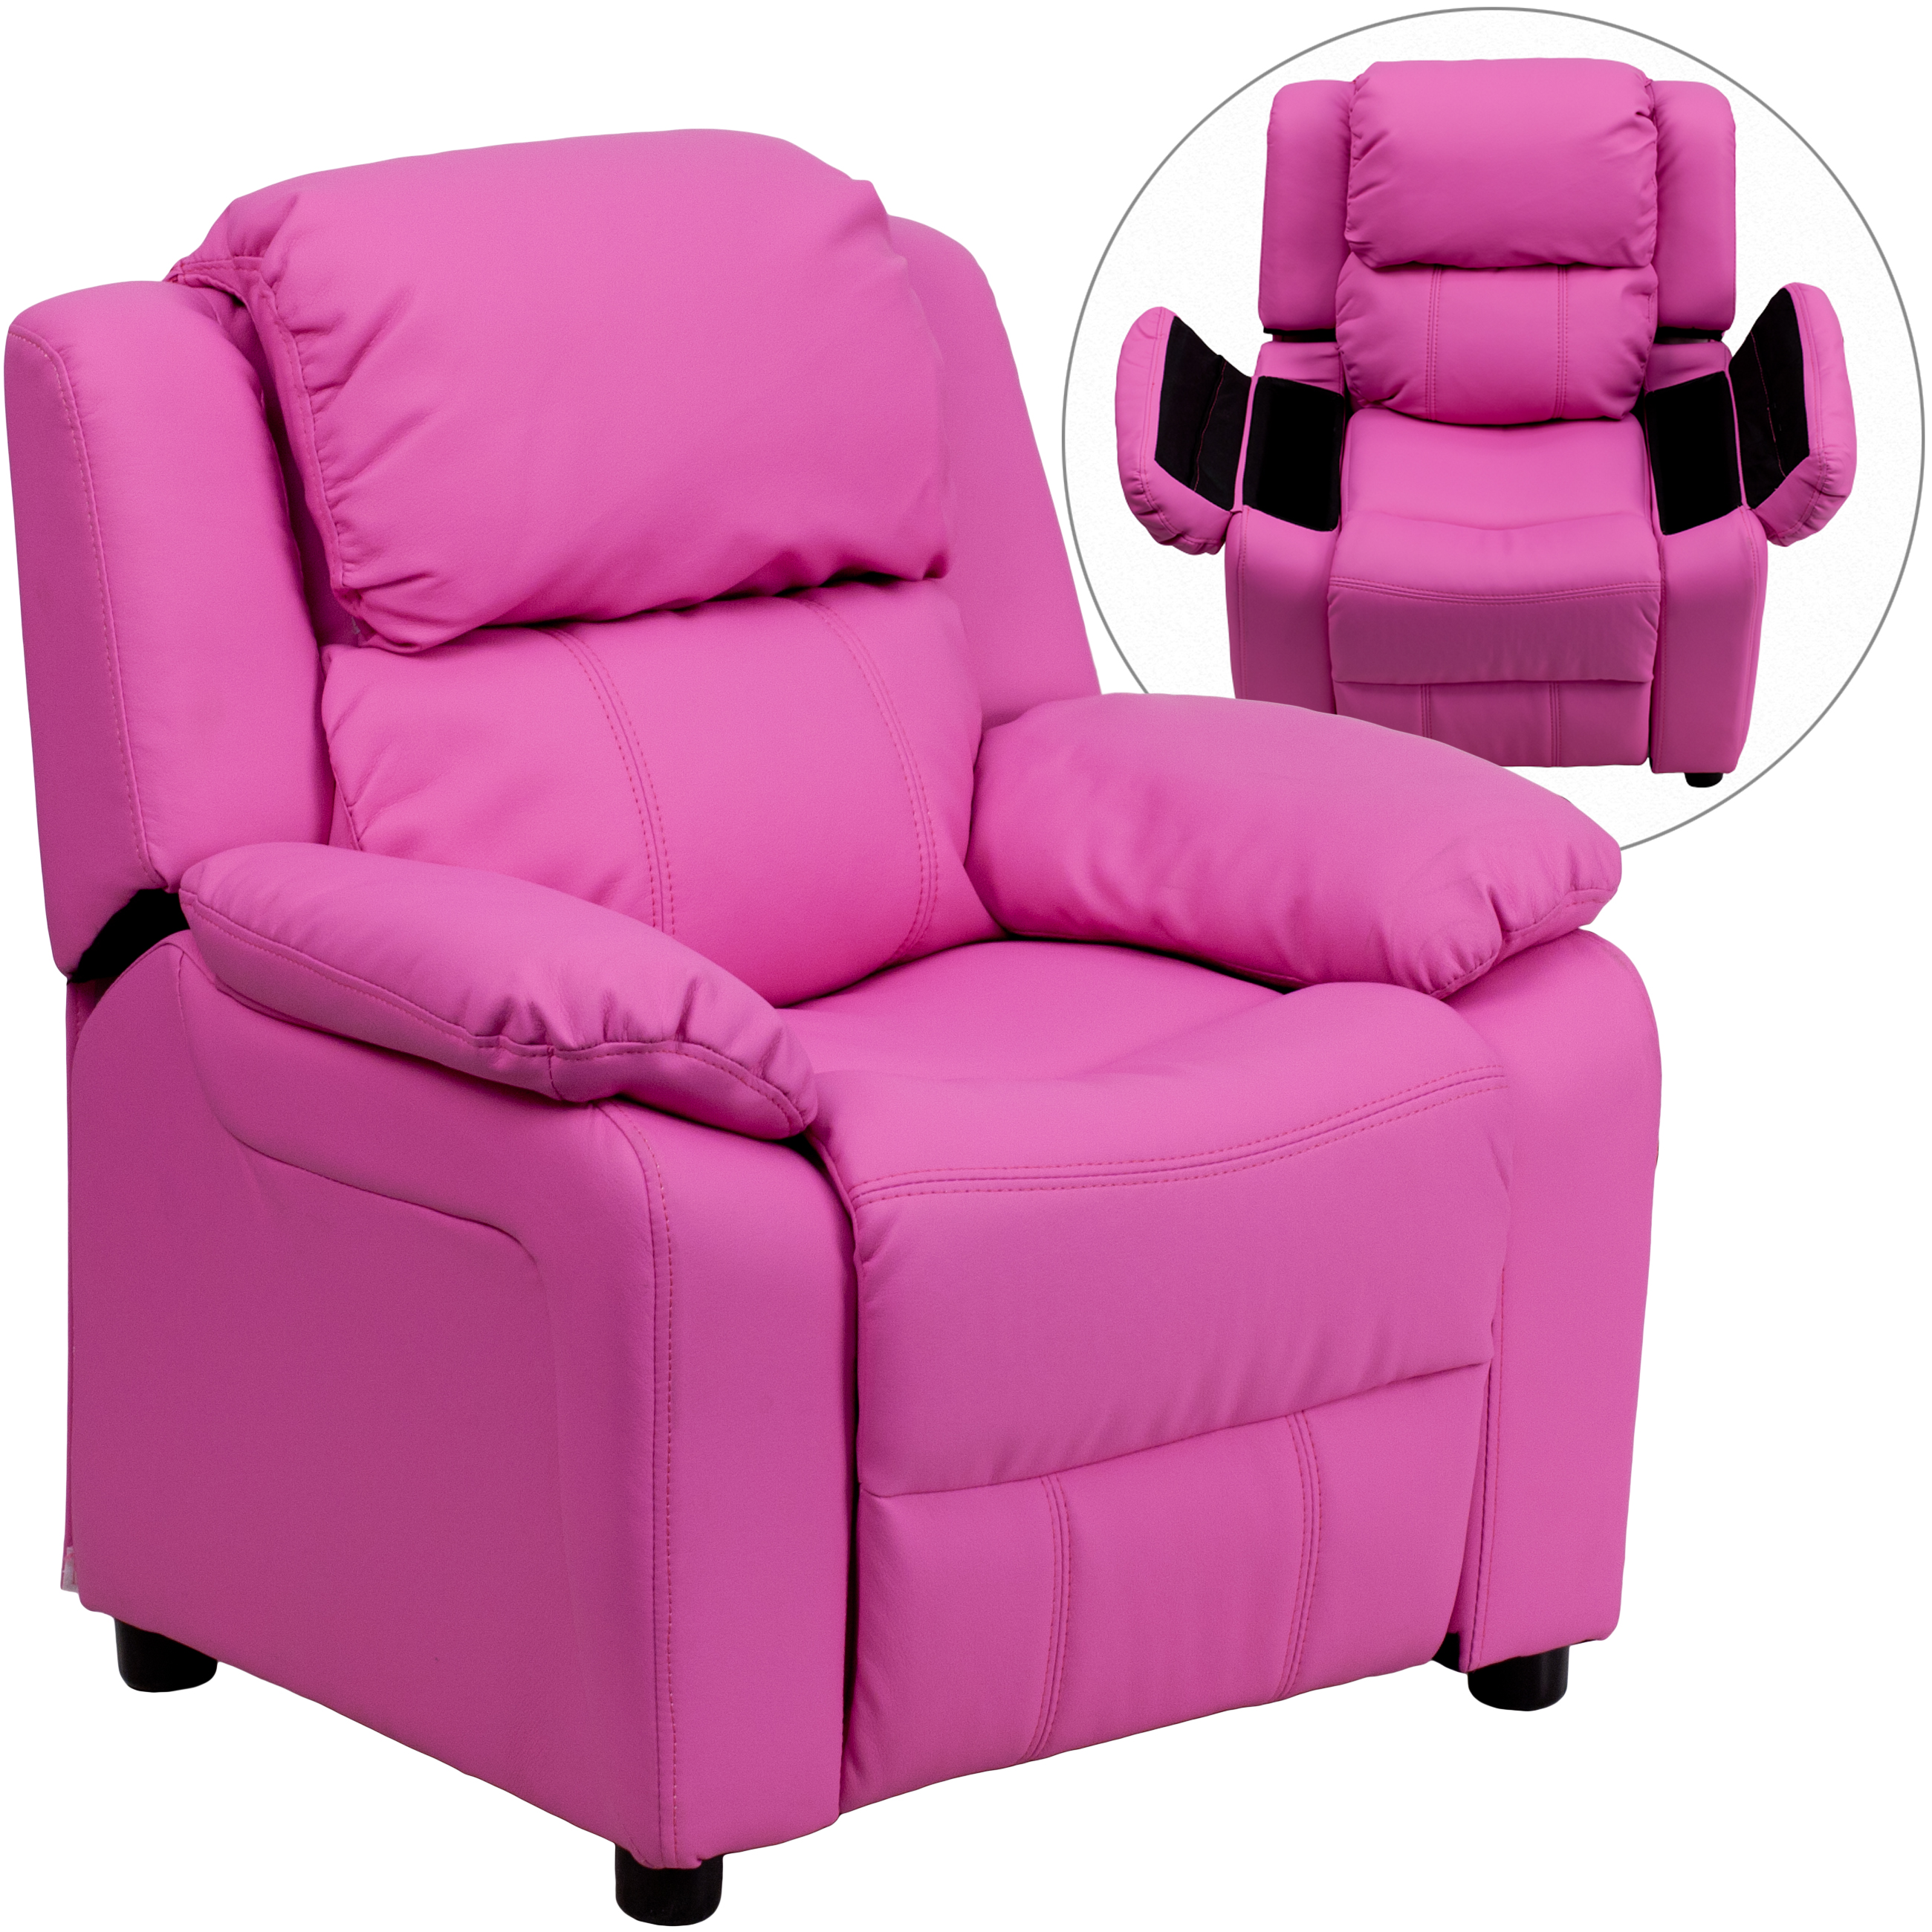 Flash Furniture Deluxe Padded Contemporary Hot Pink Vinyl Kids Recliner with Storage Arms - image 2 of 13